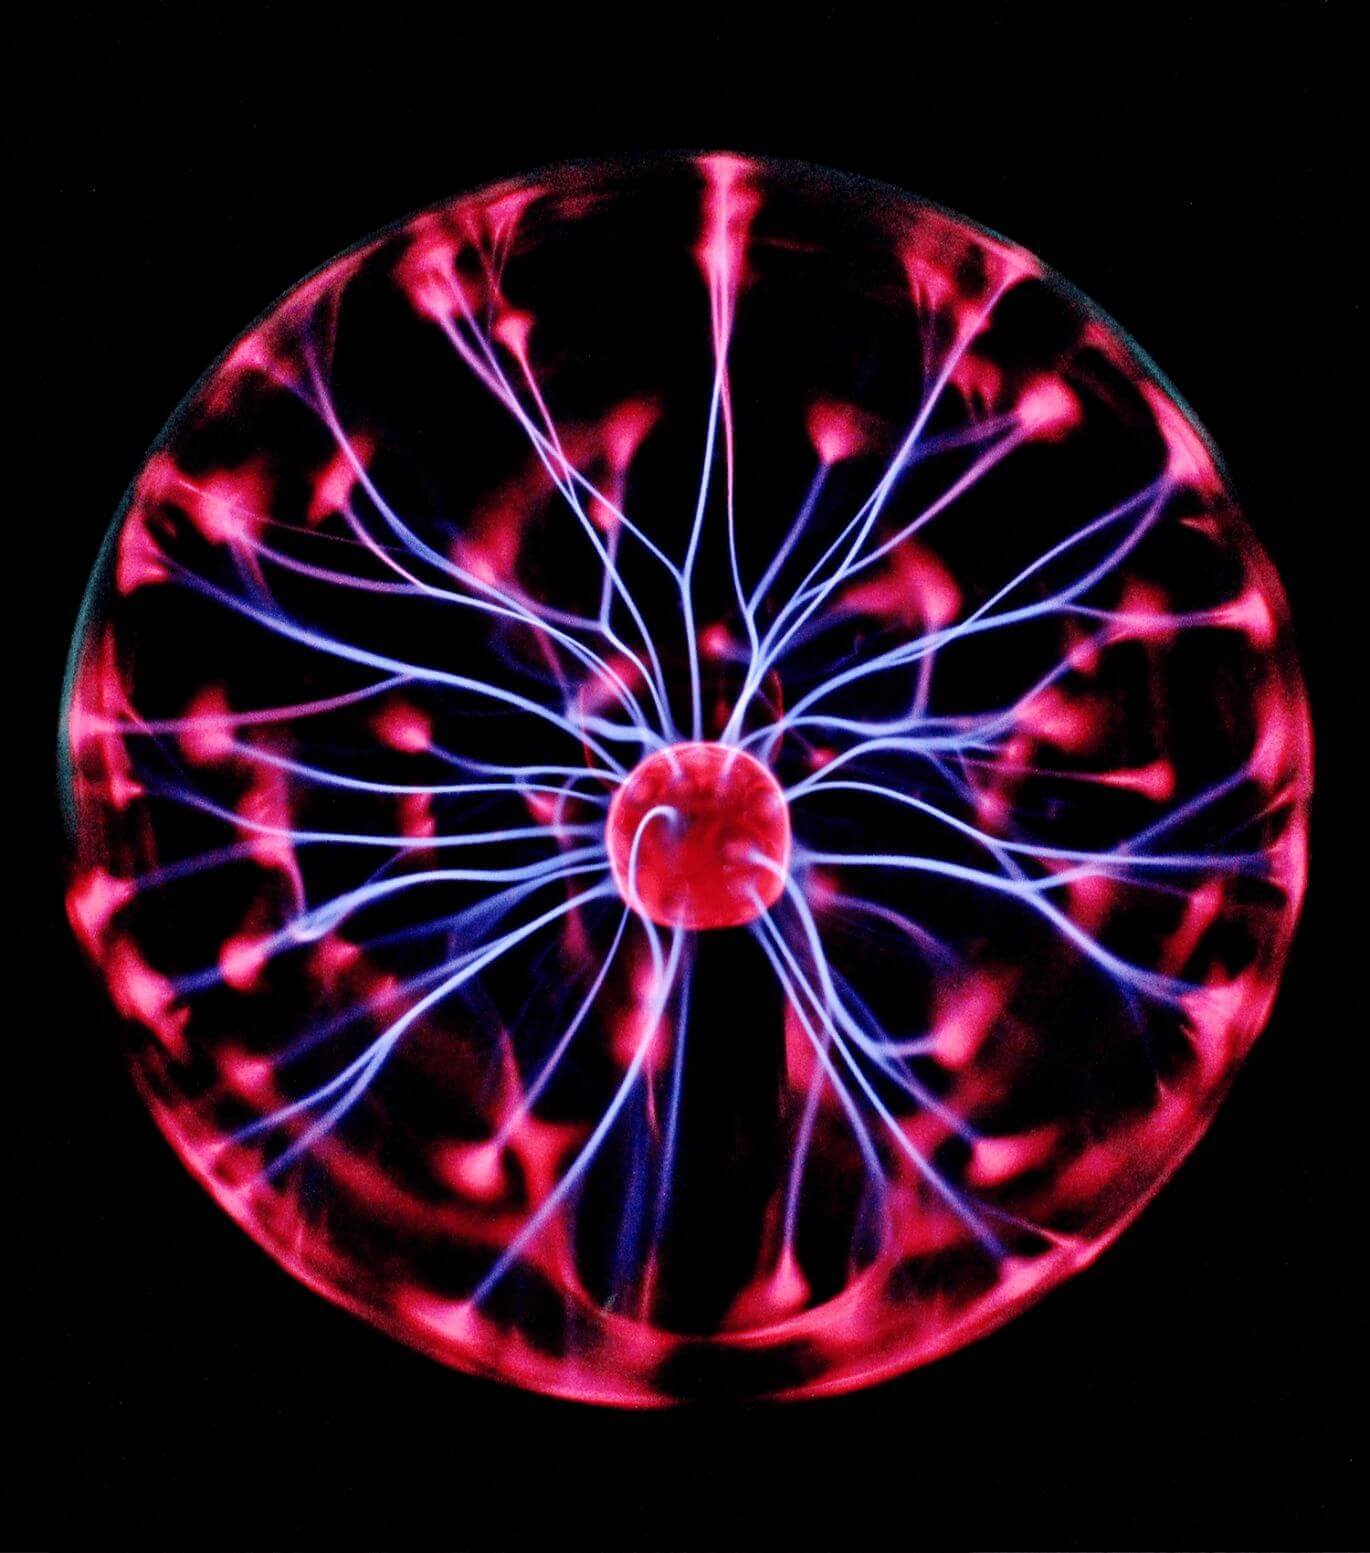 Pink and purple plasma ball in a black background